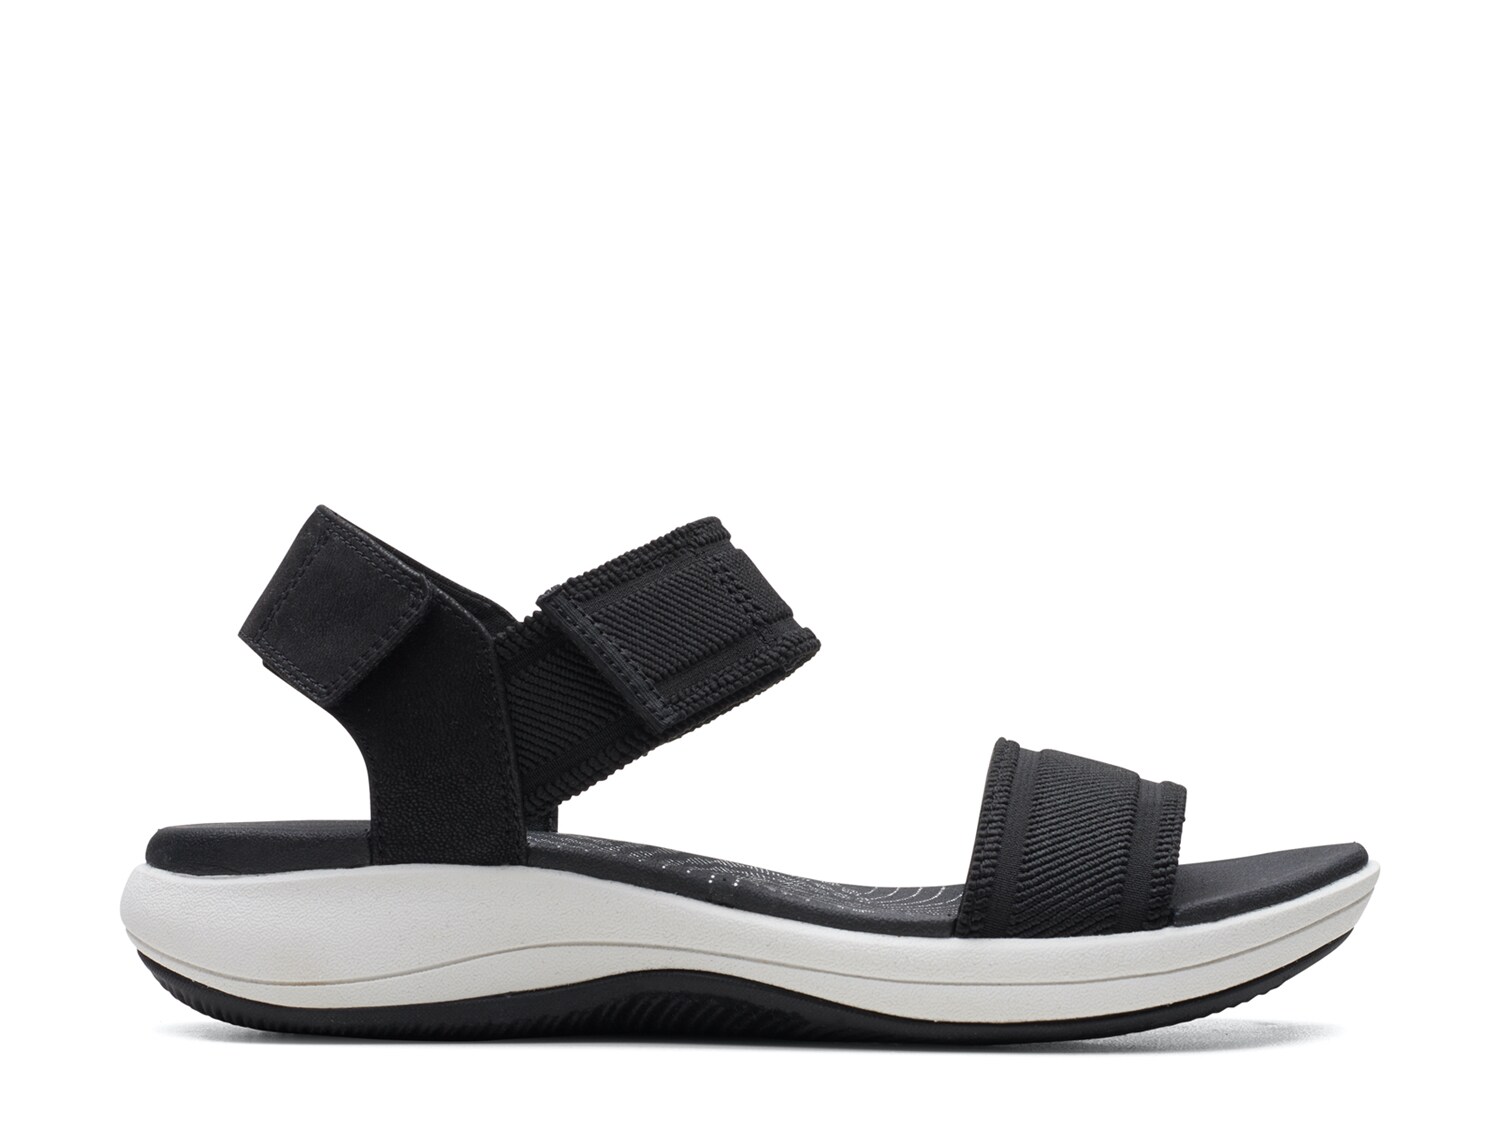 Cloudsteppers by Clarks Mira Sea Sandal | DSW